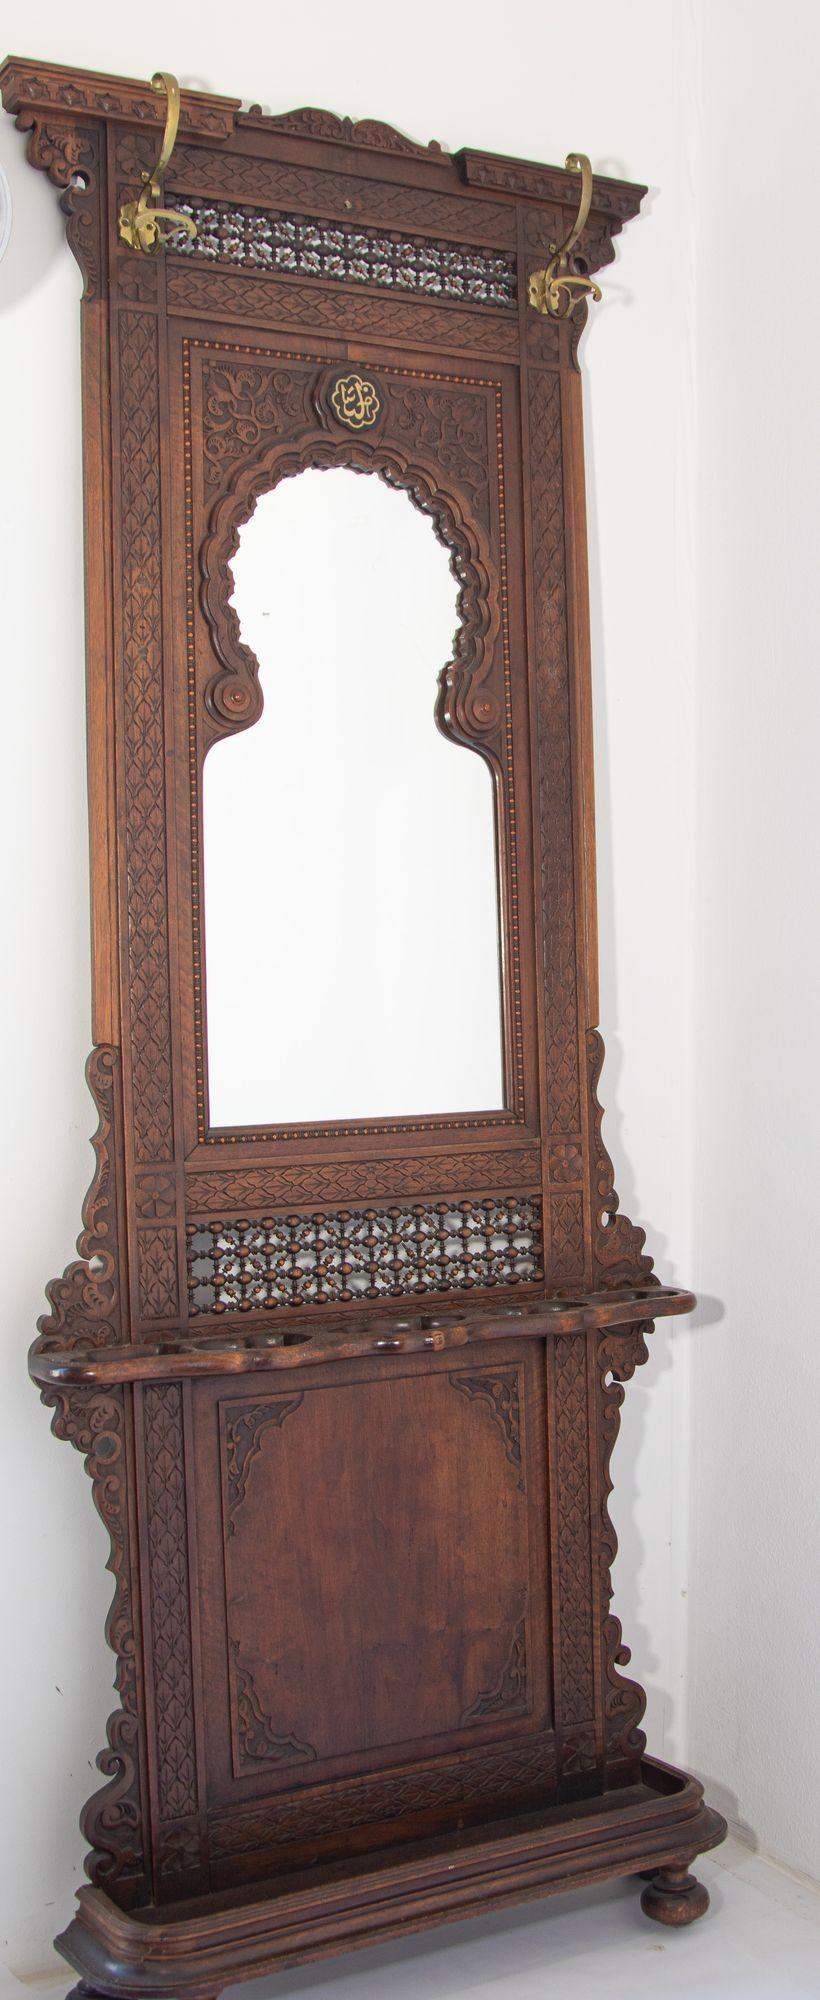 19th Century French Colonial Moorish Style Hall Tree.
Moorish hall tree with mirror 2 brass coat hooks, heavily carved wood with leafy scrollwork and Middle Eastern fret work.
This elegant antique Gothic coat rack with umbrella and cane holder was